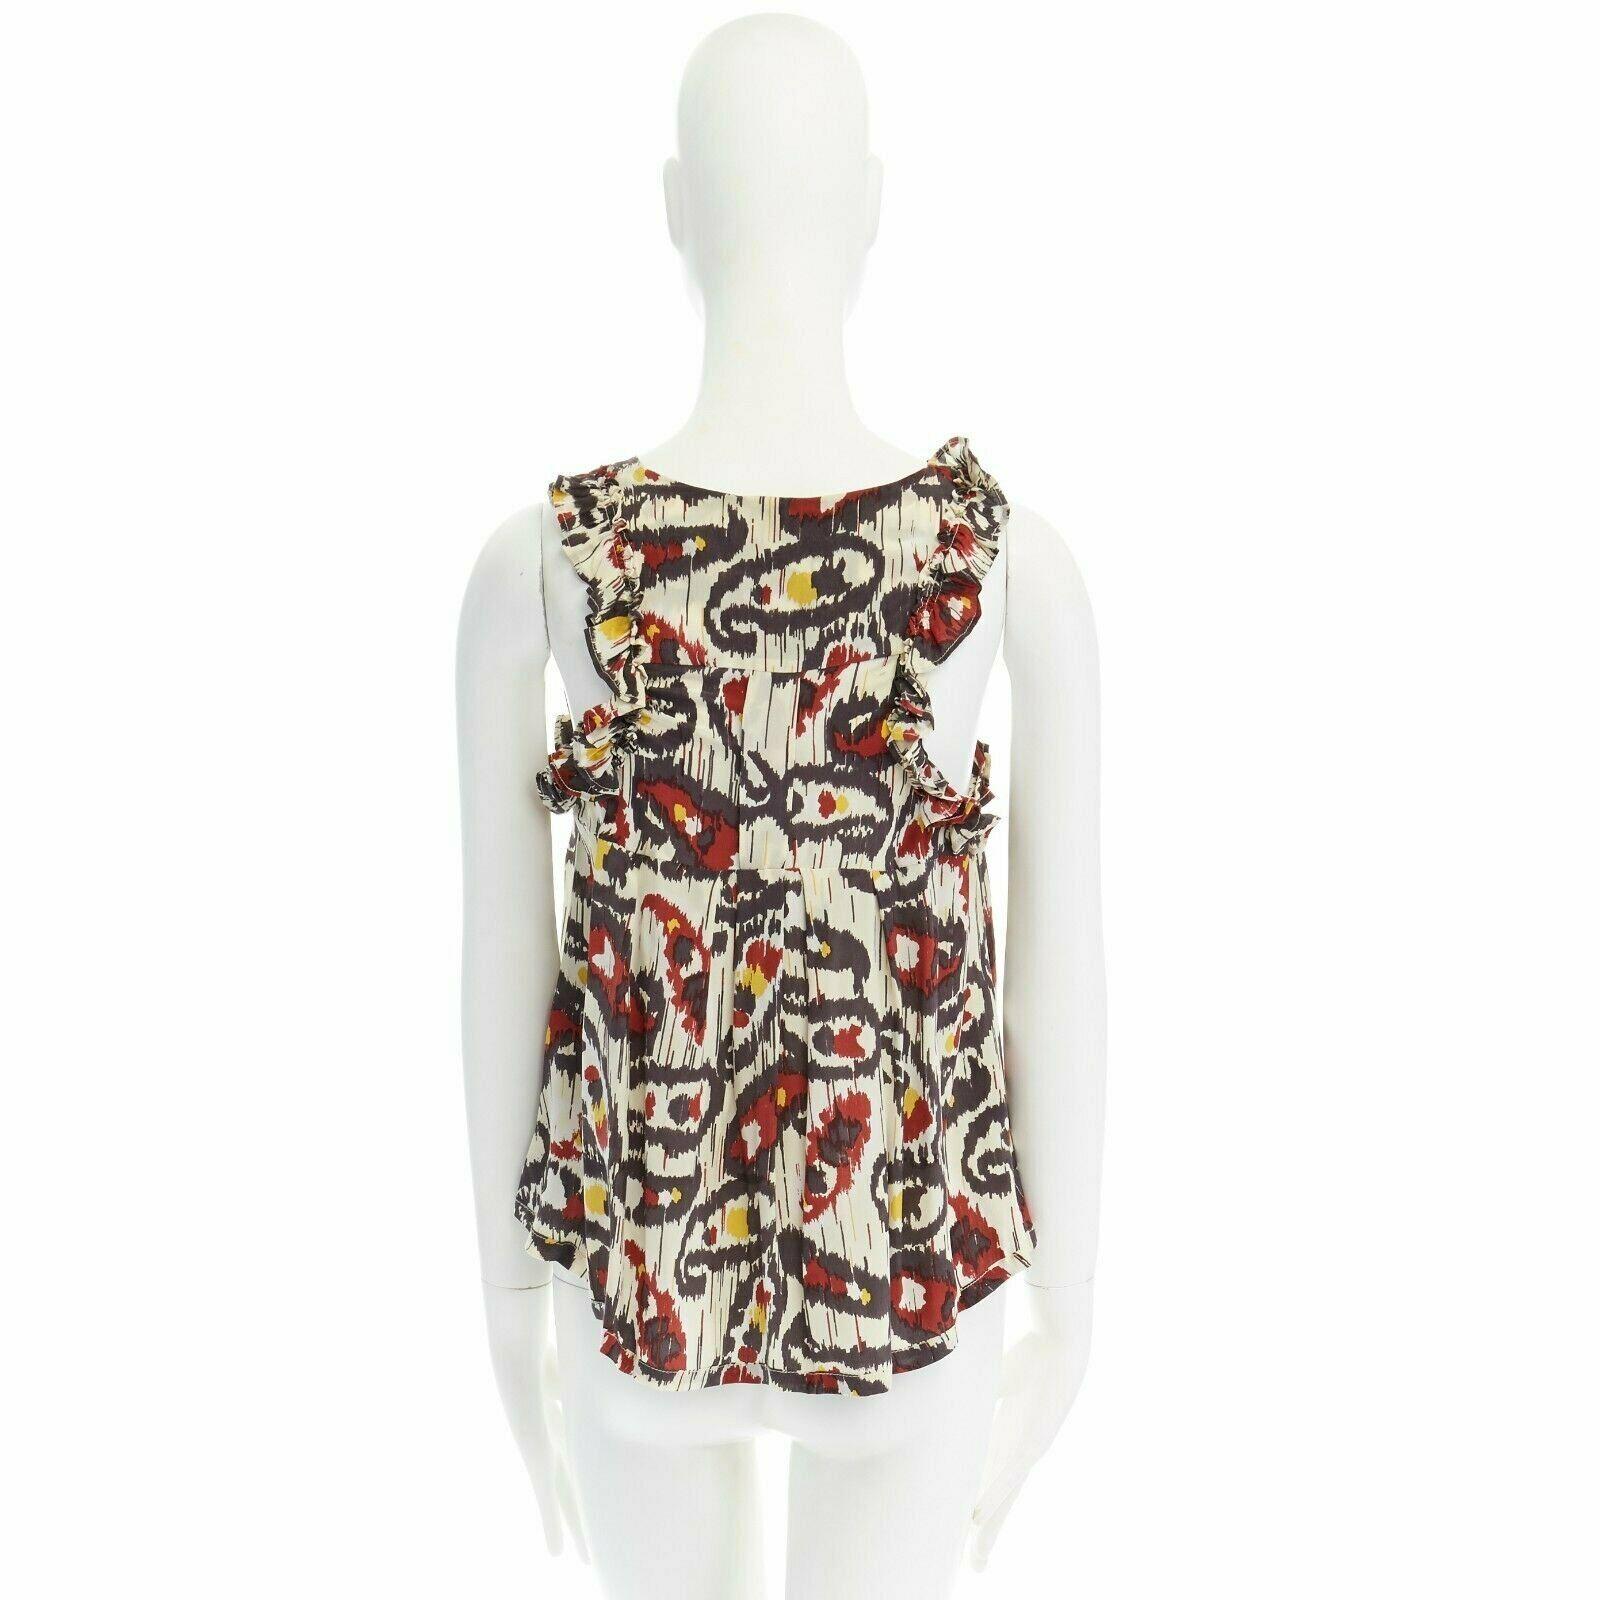 ISABEL MARANT Ikat cream ethnic print silk ruffle cut-out top FR34 XS US2 UK6 For Sale 1